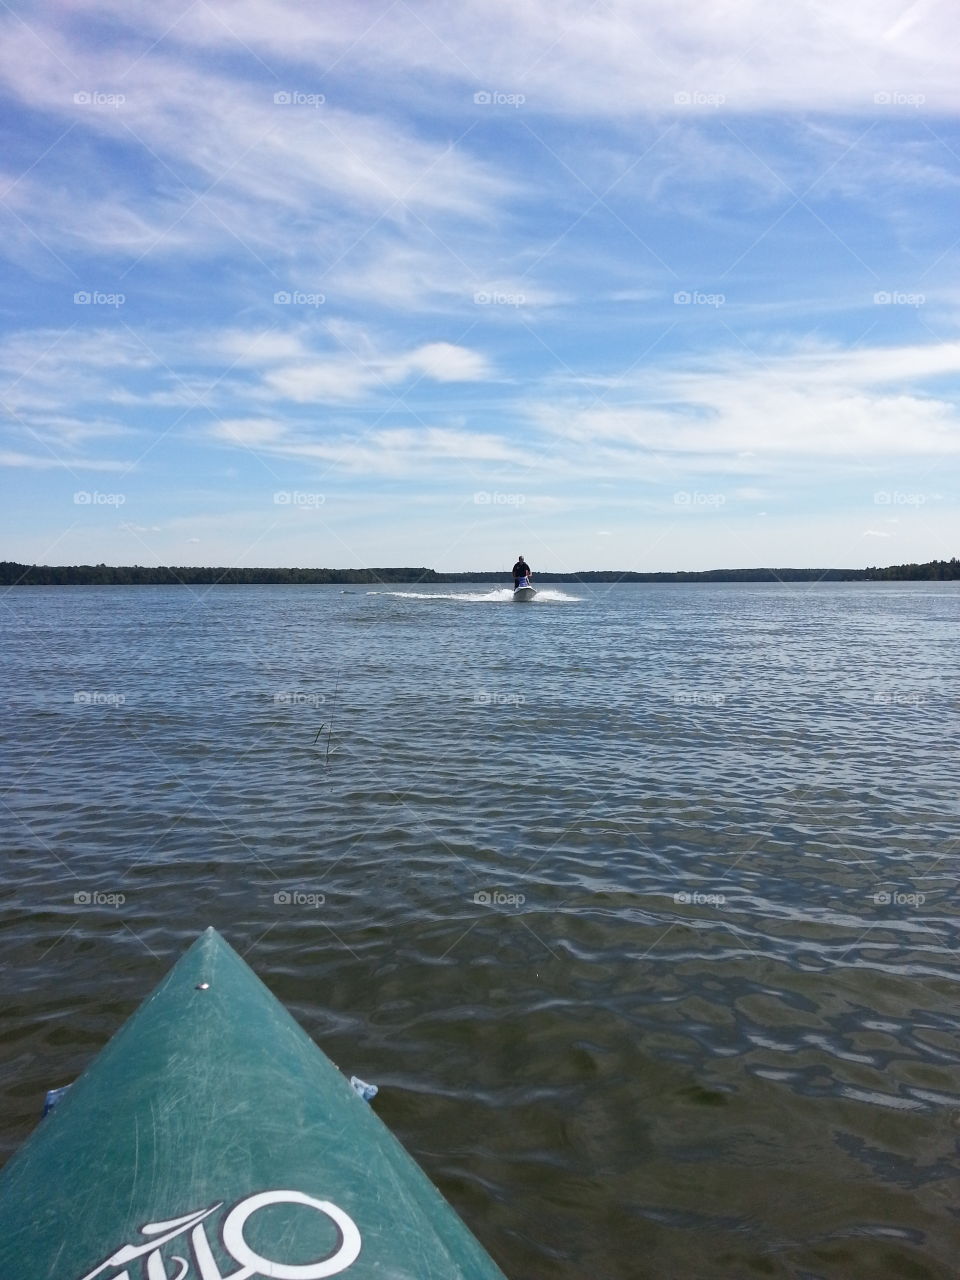 My view from the kayak